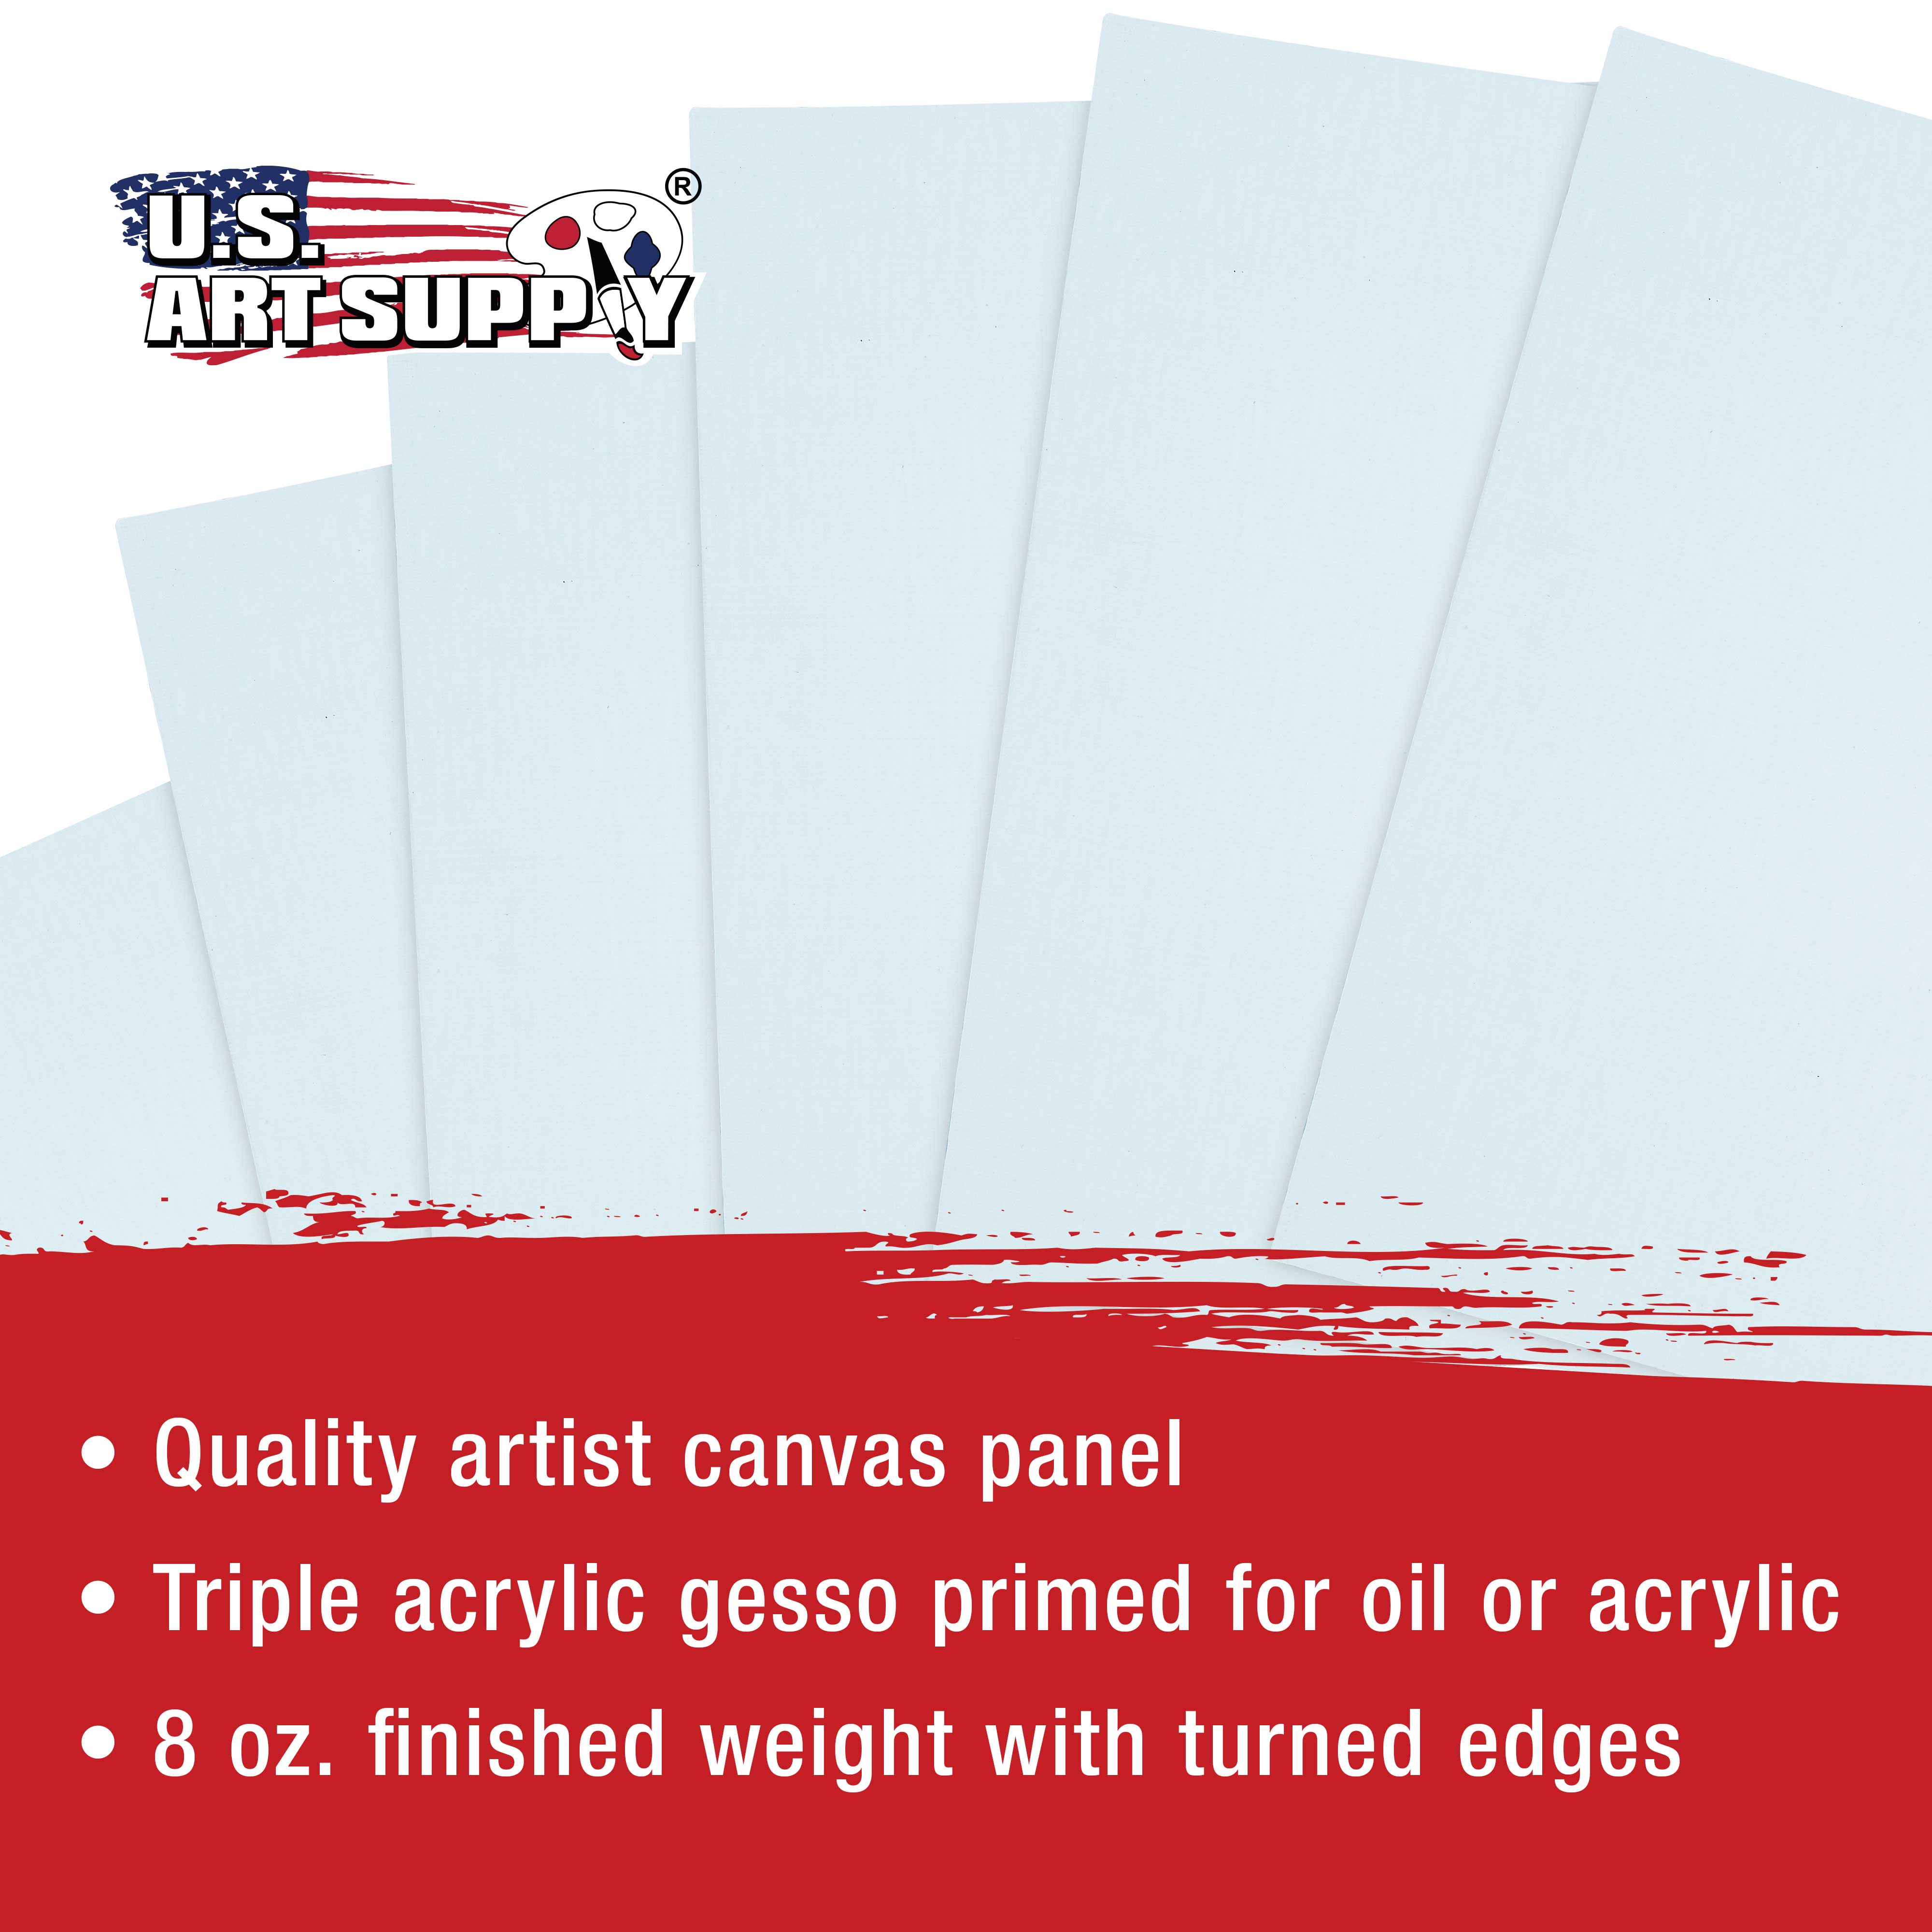 U.S. Art Supply 6 X 6 inch Professional Artist Quality Acid Free Canvas Panel Boards 12-Pack (1 Full Case of 12 Single Canvas Panel Boards) - image 4 of 6